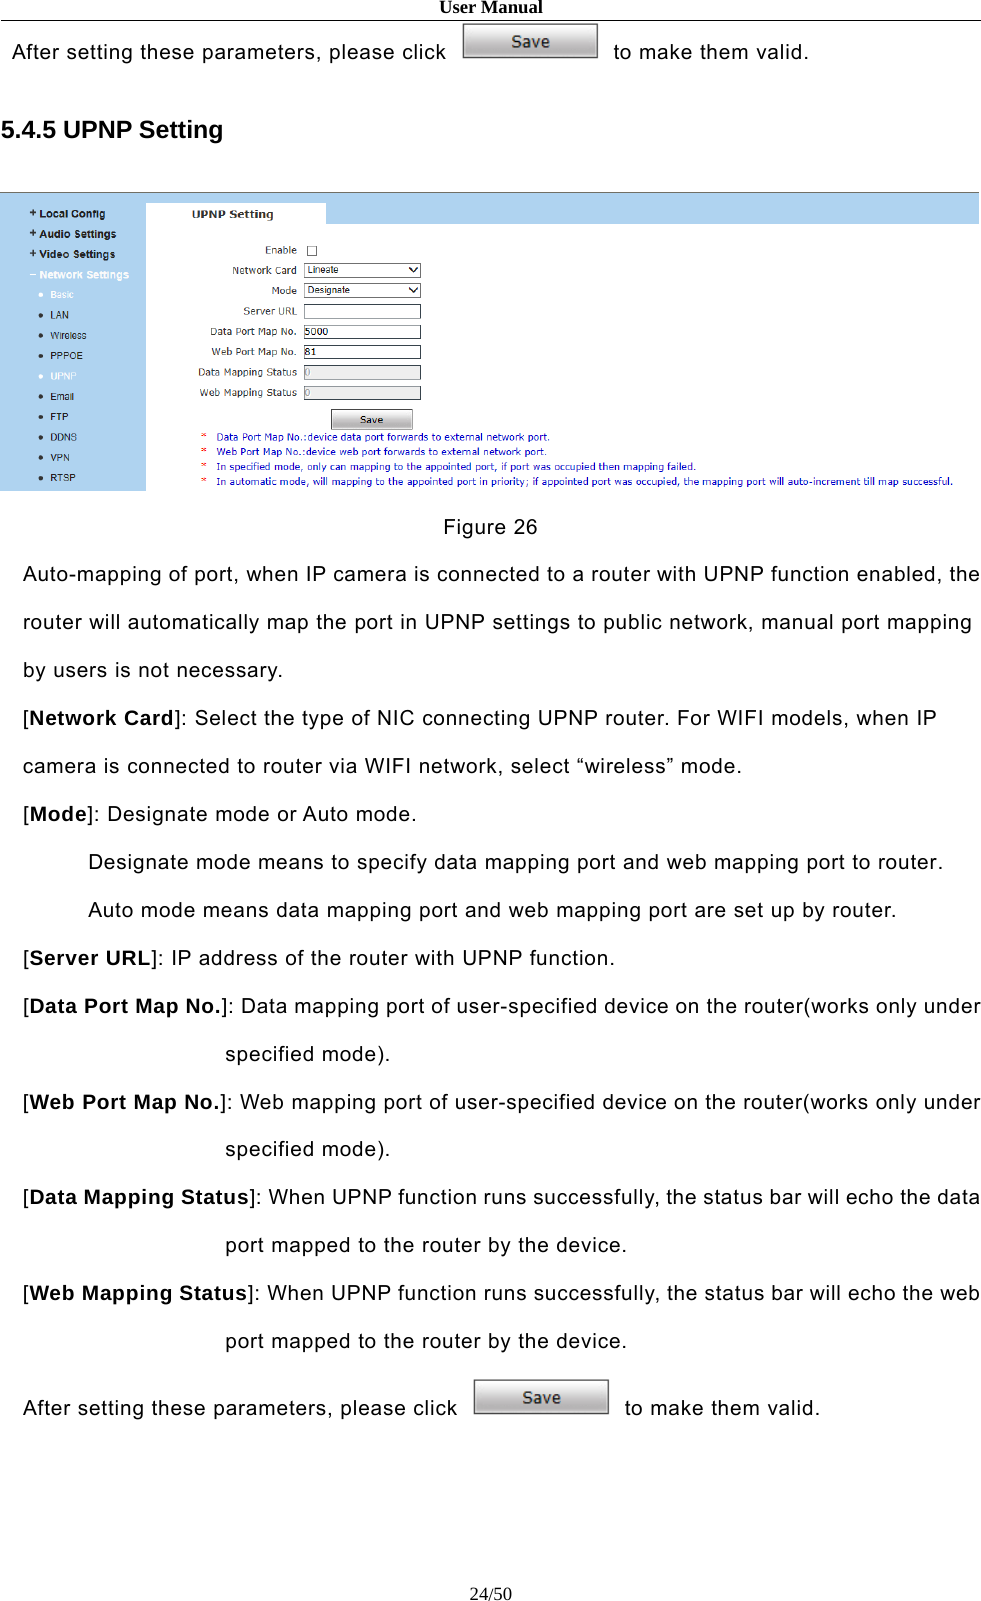 User Manual24/50After setting these parameters, please click to make them valid.5.4.5 UPNP SettingFigure 26Auto-mapping of port, when IP camera is connected to a router with UPNP function enabled, therouter will automatically map the port in UPNP settings to public network, manual port mappingby users is not necessary.[Network Card]: Select the type of NIC connecting UPNP router. For WIFI models, when IPcamera is connected to router via WIFI network, select “wireless” mode.[Mode]: Designate mode or Auto mode.Designate mode means to specify data mapping port and web mapping port to router.Auto mode means data mapping port and web mapping port are set up by router.[Server URL]: IP address of the router with UPNP function.[Data Port Map No.]: Data mapping port of user-specified device on the router(works only underspecified mode).[Web Port Map No.]: Web mapping port of user-specified device on the router(works only underspecified mode).[Data Mapping Status]: When UPNP function runs successfully, the status bar will echo the dataport mapped to the router by the device.[Web Mapping Status]: When UPNP function runs successfully, the status bar will echo the webport mapped to the router by the device.After setting these parameters, please click to make them valid.